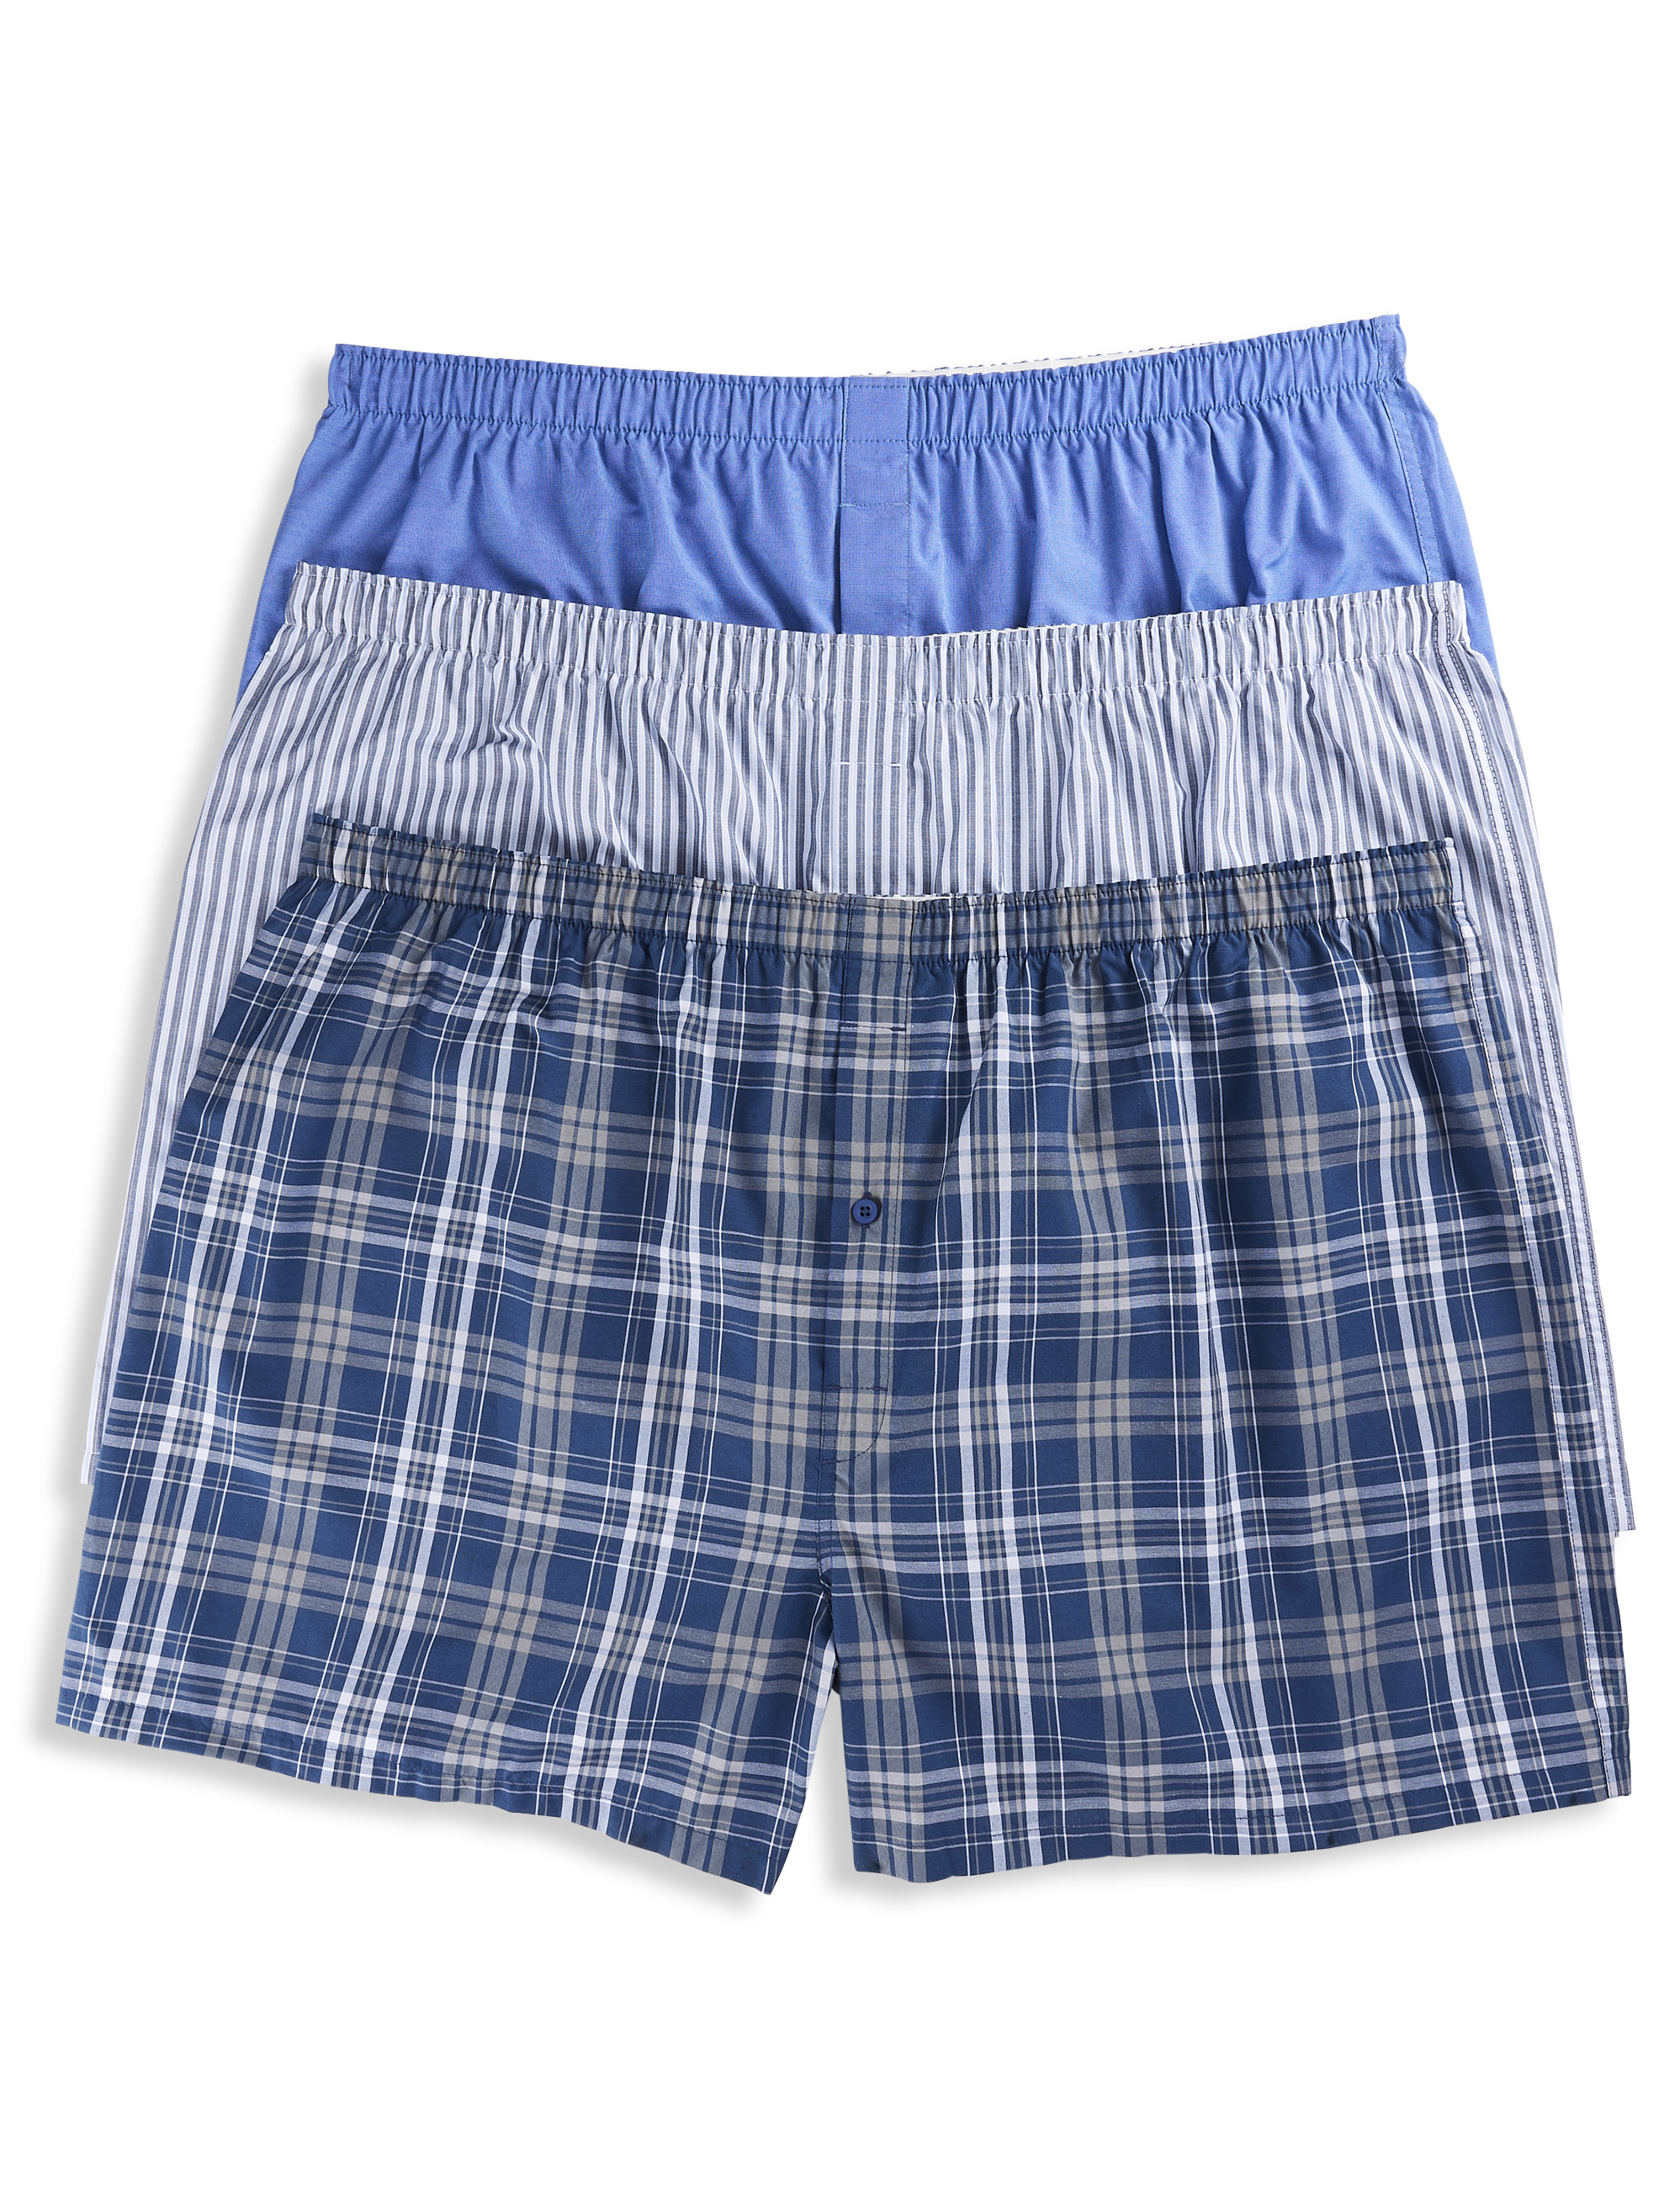 Stafford 4 Pack Woven Cotton Boxers (Small, Black Plaid) at